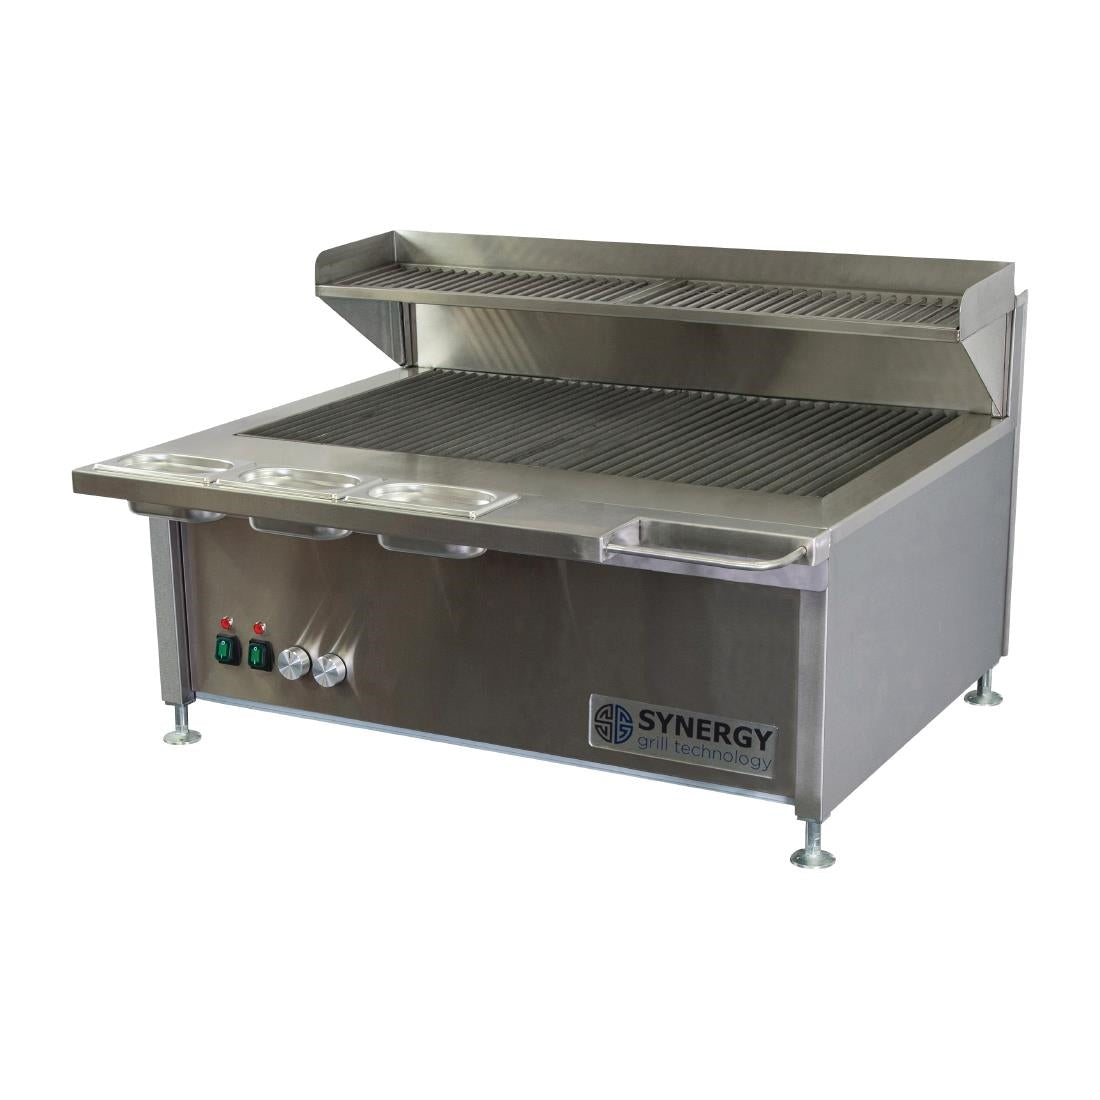 Synergy ST900 Deep with Garnish Rail and Slow Cook Shelf - FD490 Charcoal Grills Synergy Grill   